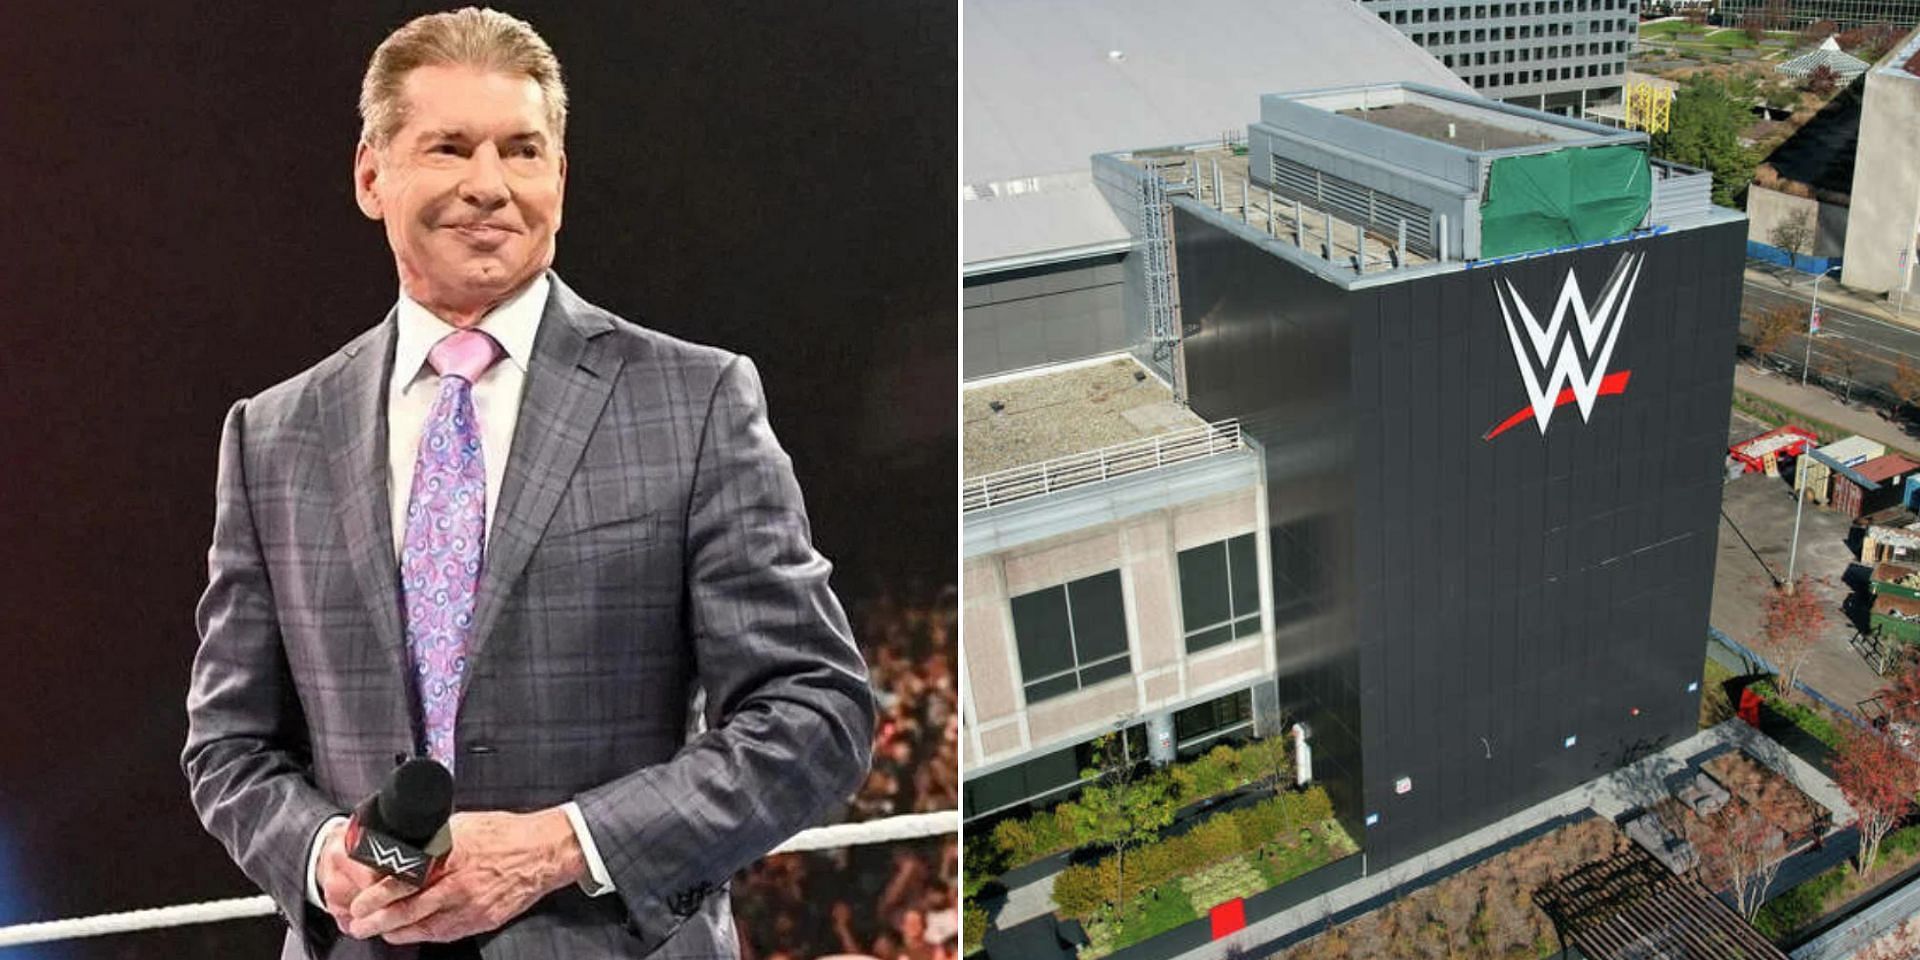 Vince McMahon recently sold millions of his WWE shares